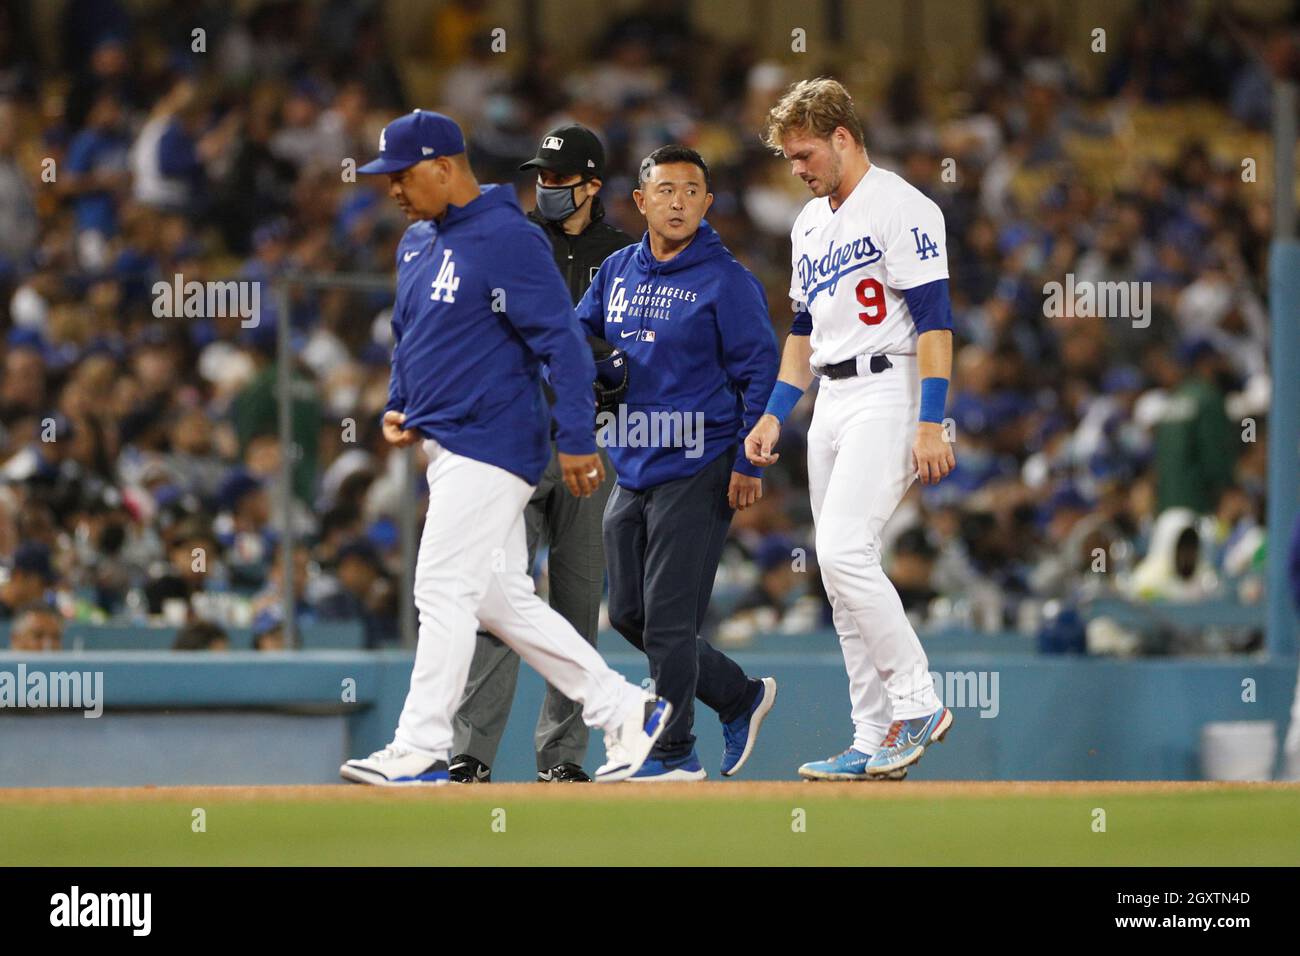 Los Angeles Dodgers center fielder Gavin Lux (9) exits the game with an apparent injury during an MLB regular season game against the San Diego Padres Stock Photo